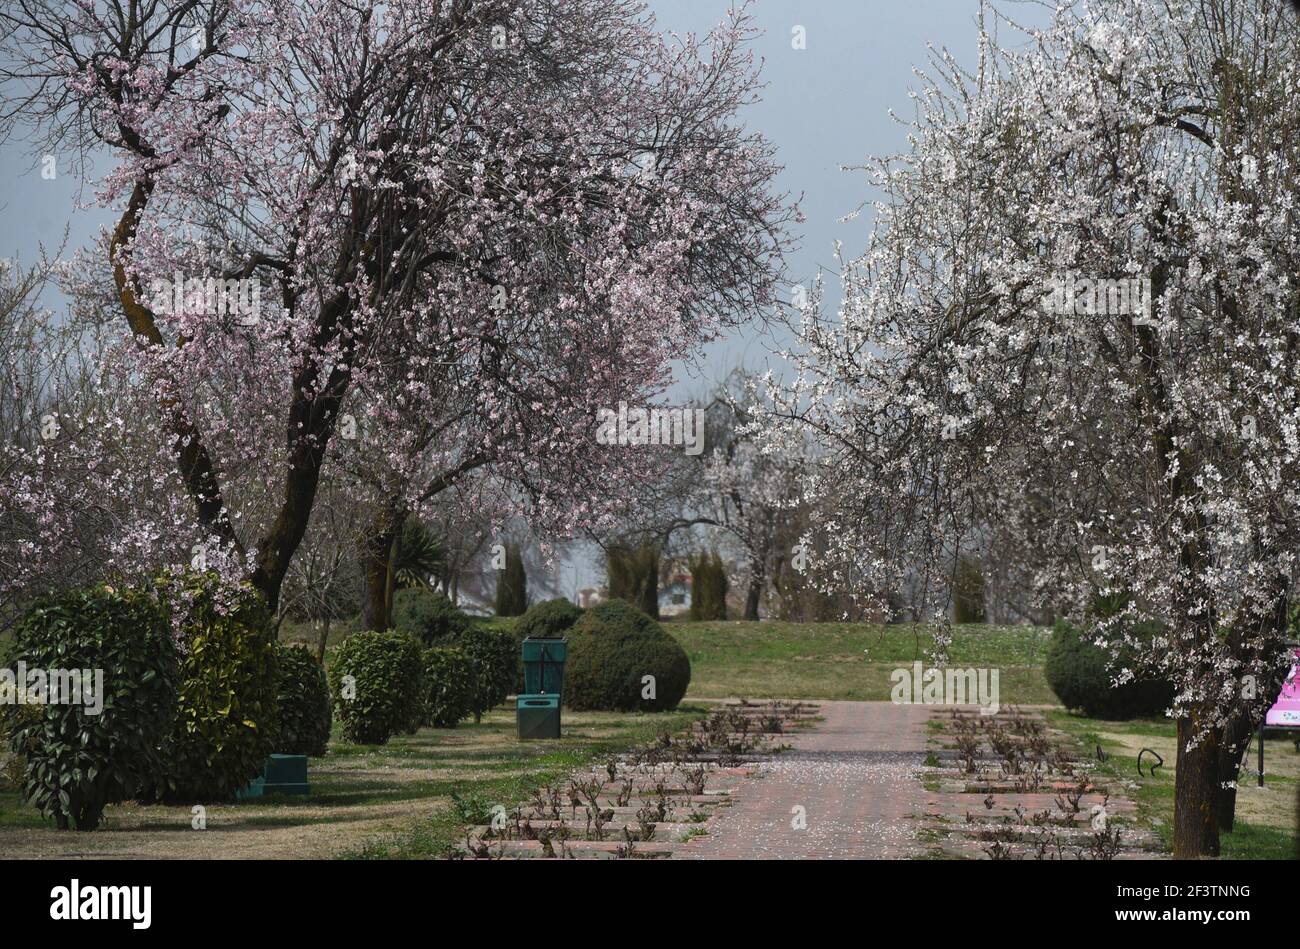 Srinagar, India. 17th Mar, 2021. SRINAGAR, INDIA - MARCH 17: Almond trees in bloom at Badamwari, old Downtown area on March 17, 2021 in Srinagar, India. Almond Alcove in Srinagar, known as ‘Badam Vaer' in local lexicon is one of the fabled beauty spots of Kashmir which traditionally is being frequented for spring festivities. (Photo by Waseem Andrabi/Hindustan Times/Sipa USA) Credit: Sipa USA/Alamy Live News Stock Photo